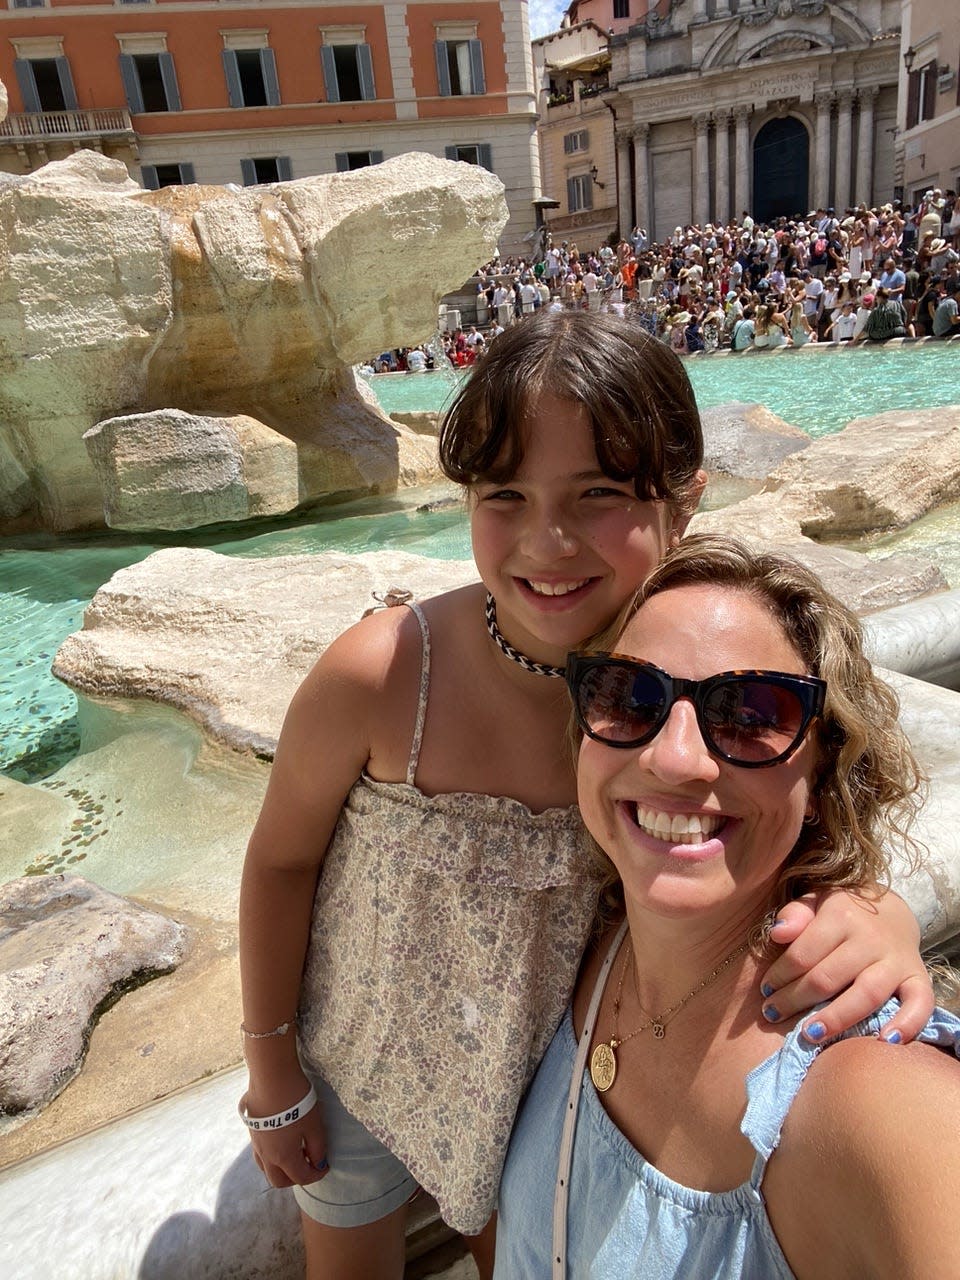 The author and her daughter in front of the Trevi Fountain.